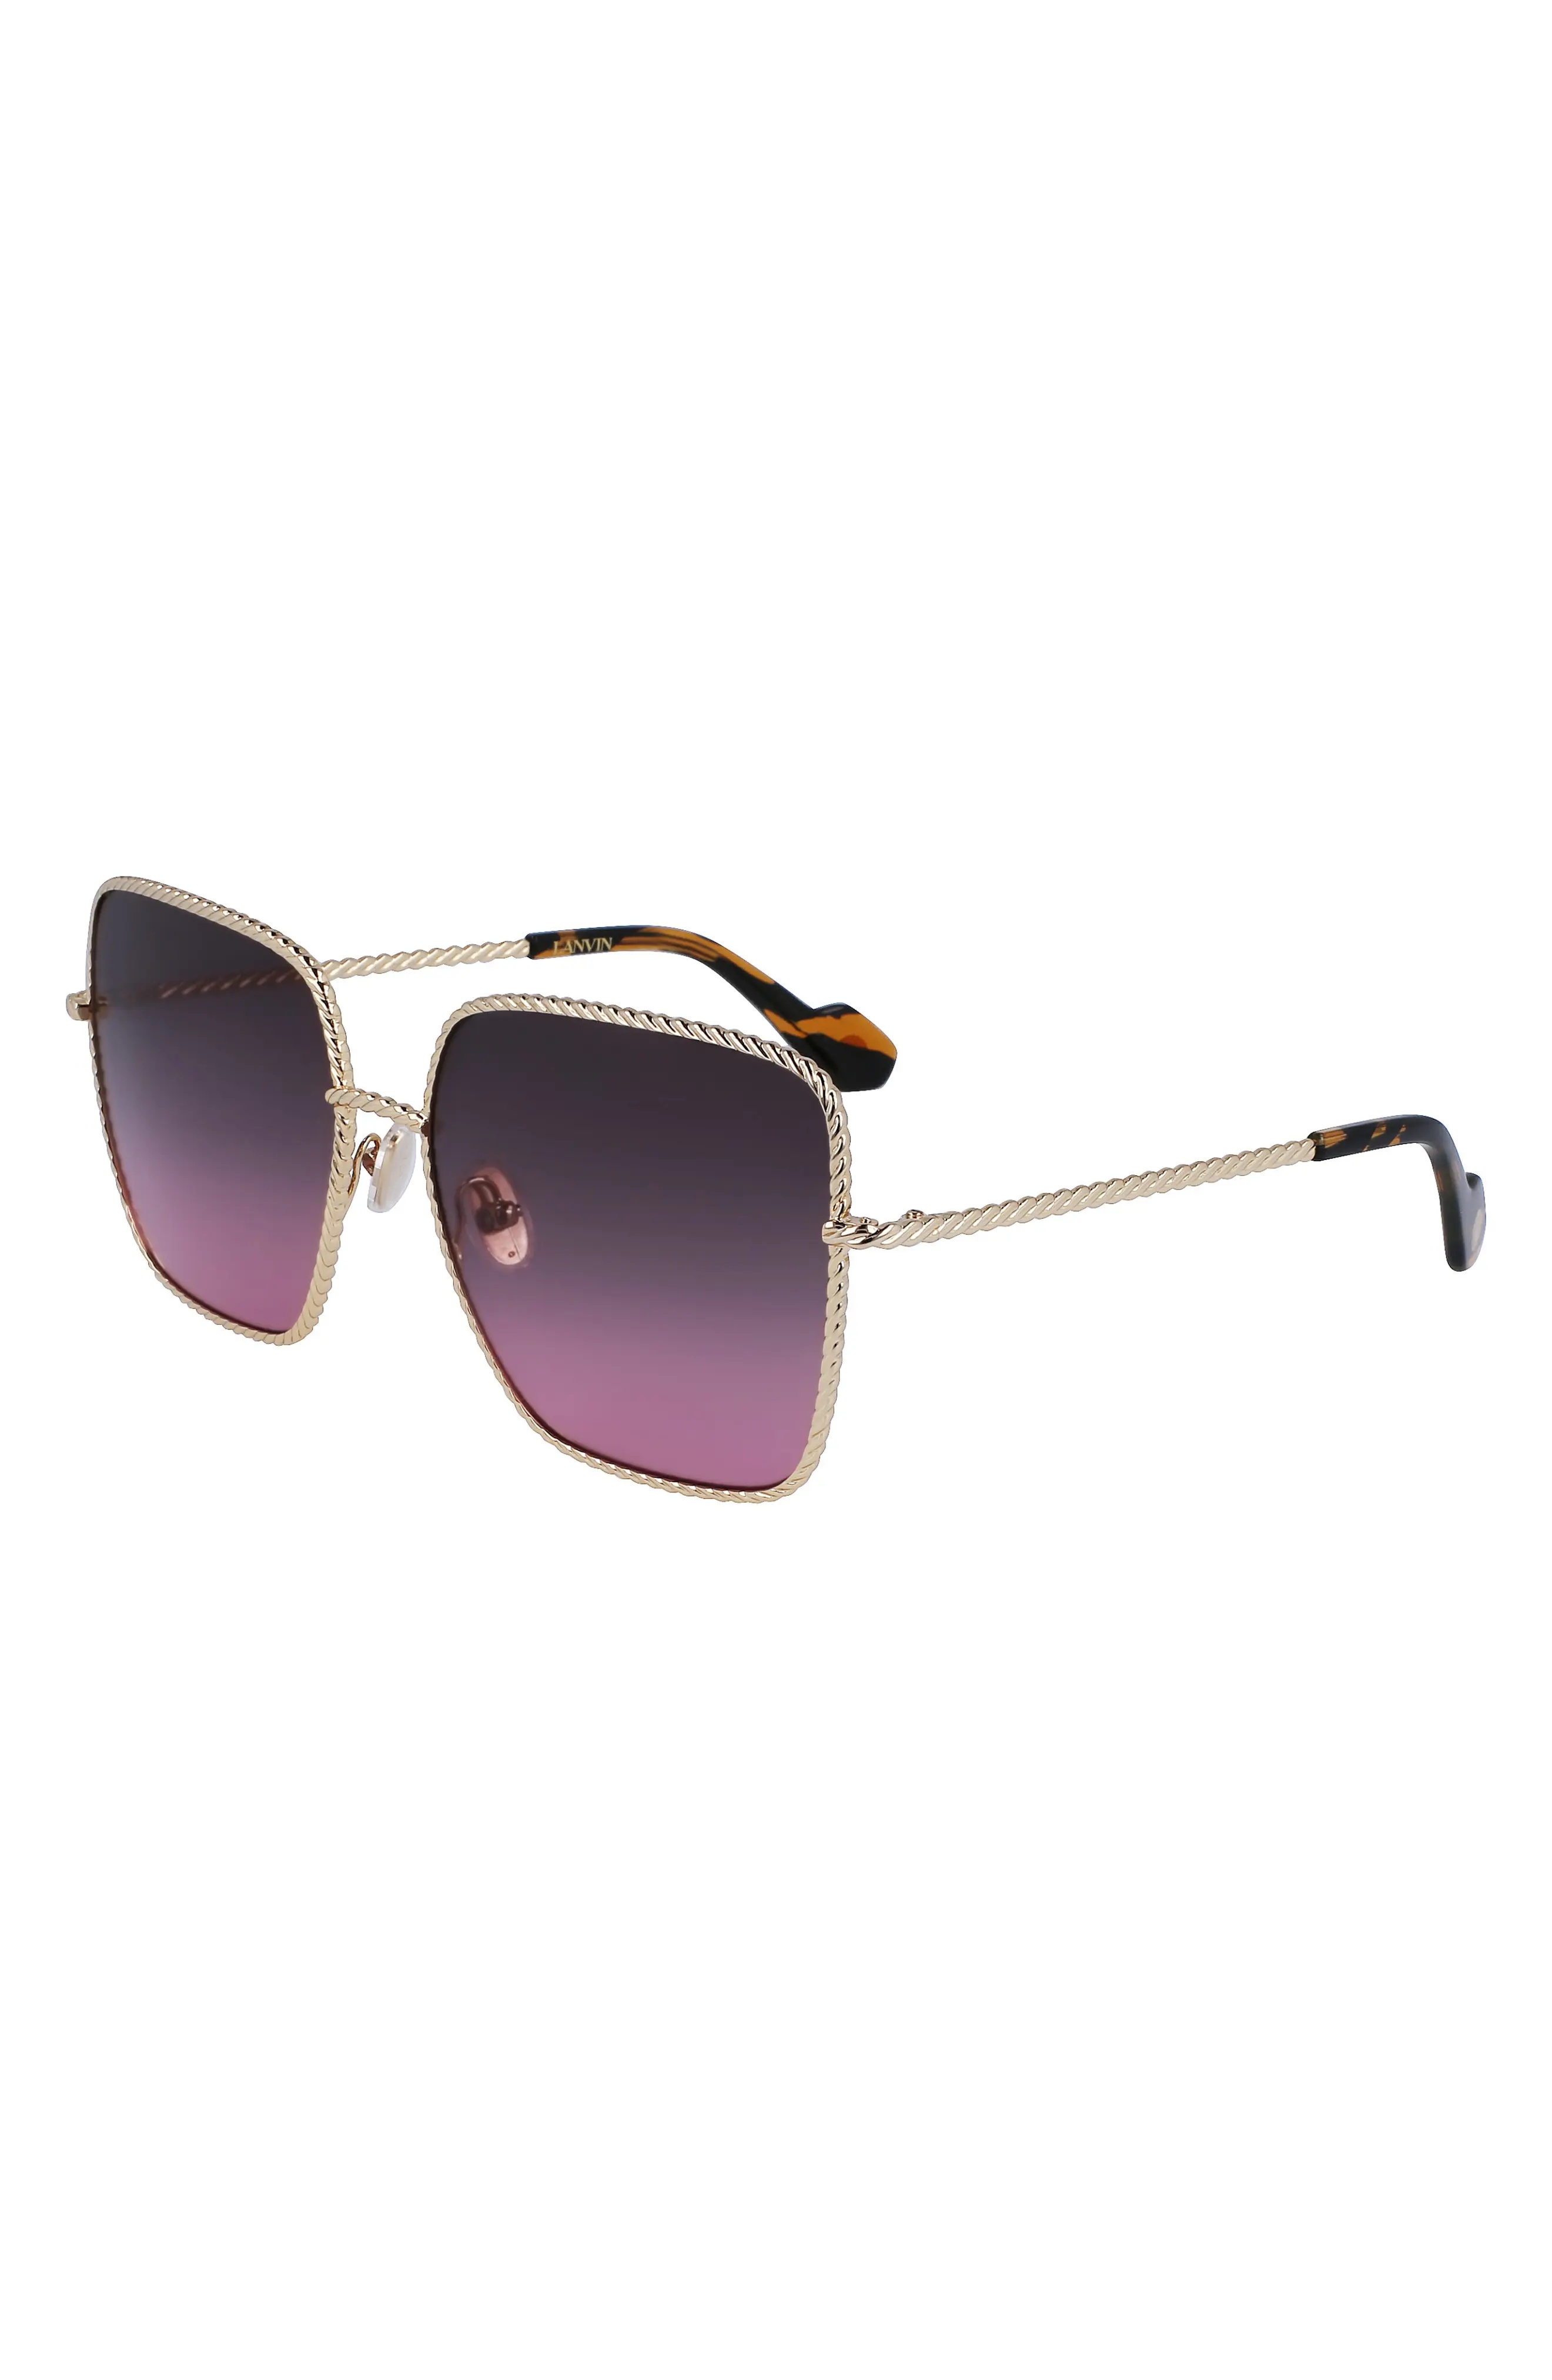 Babe 59mm Gradient Square Sunglasses in Gold/Gradient Grey Rose - 2